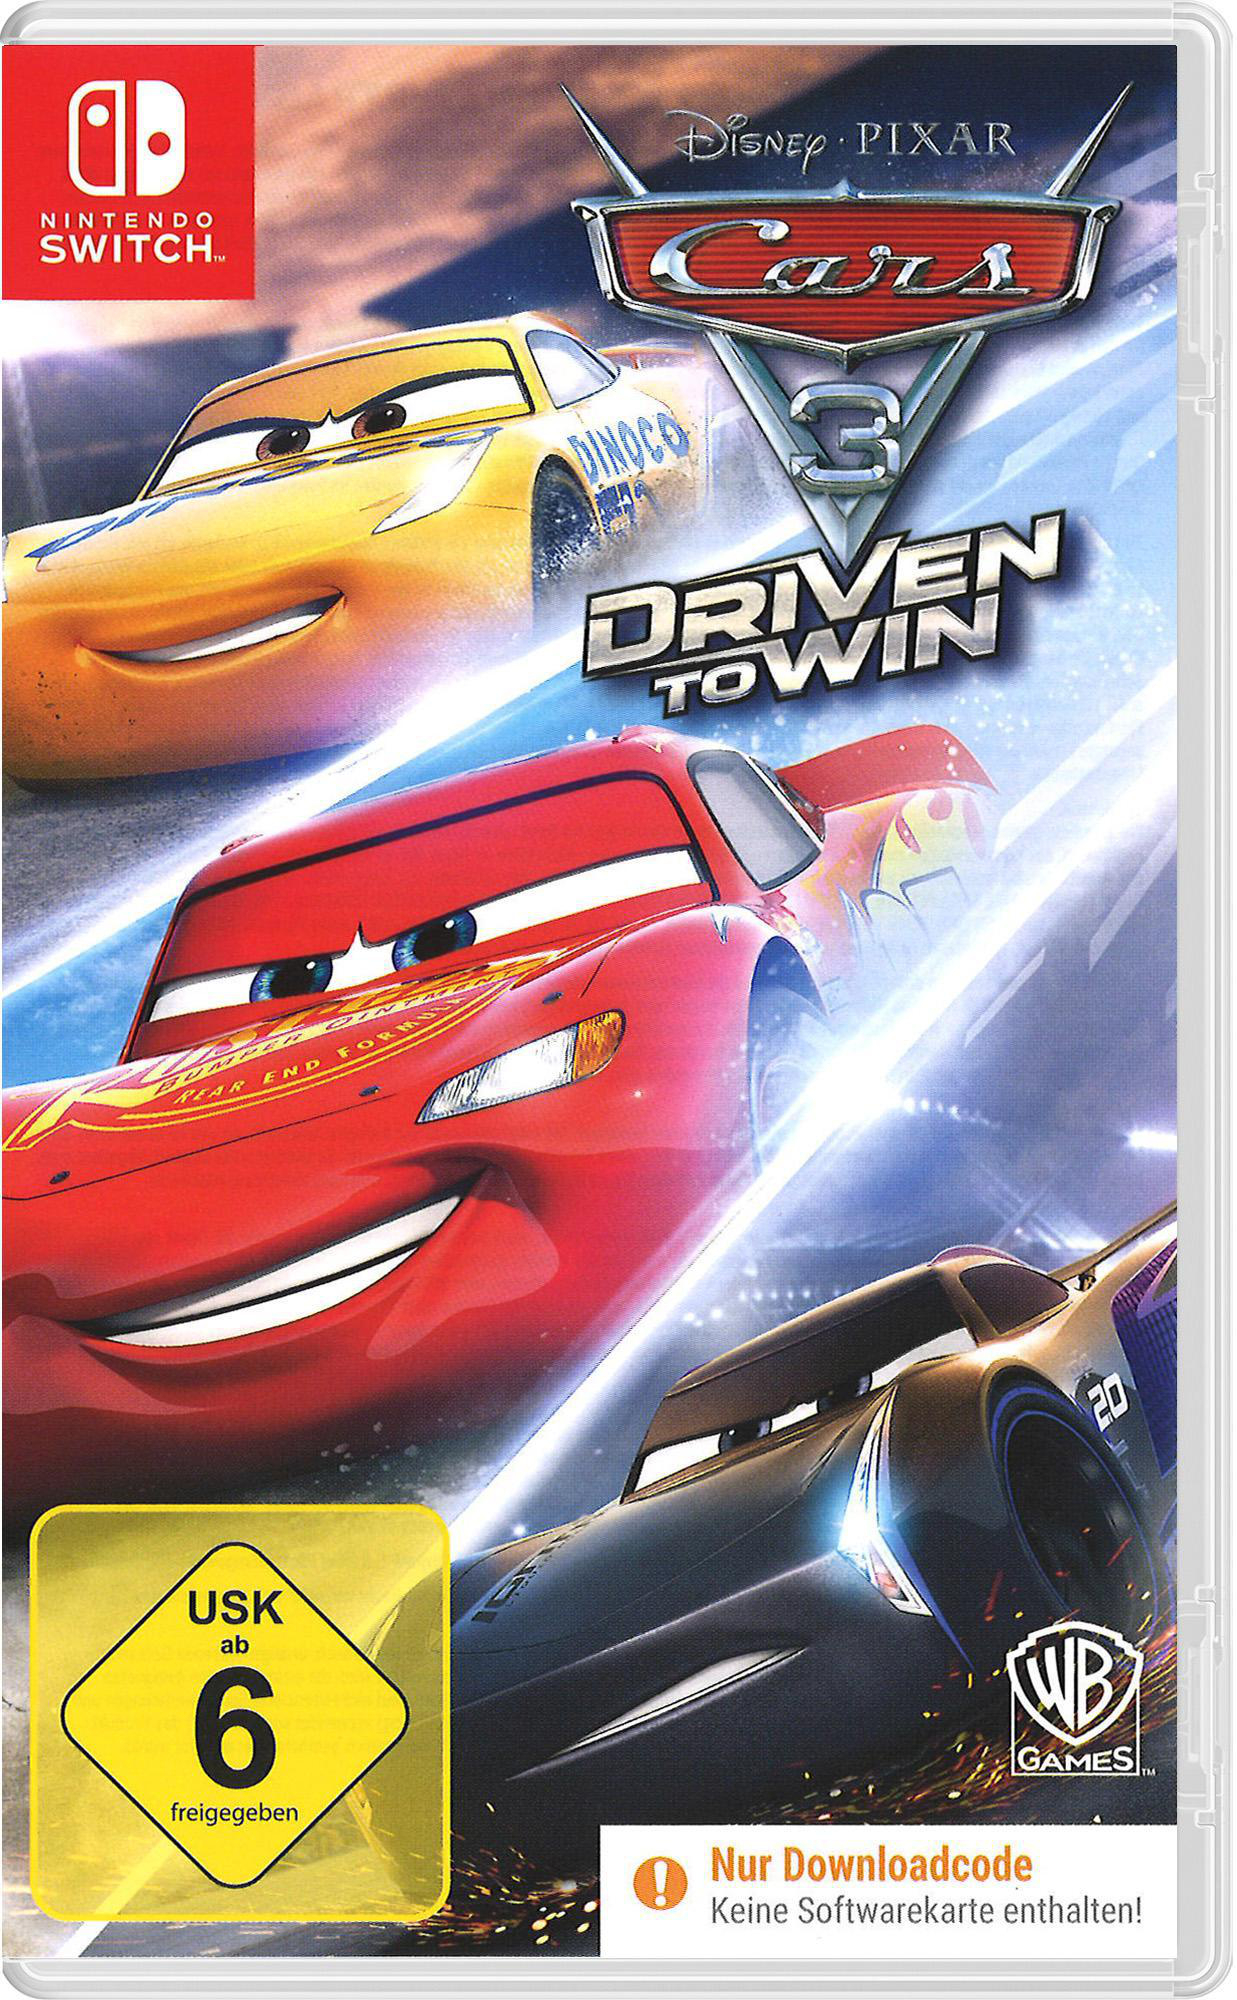 Switch] Box - 3: Driven der Code Cars To Win - in [Nintendo